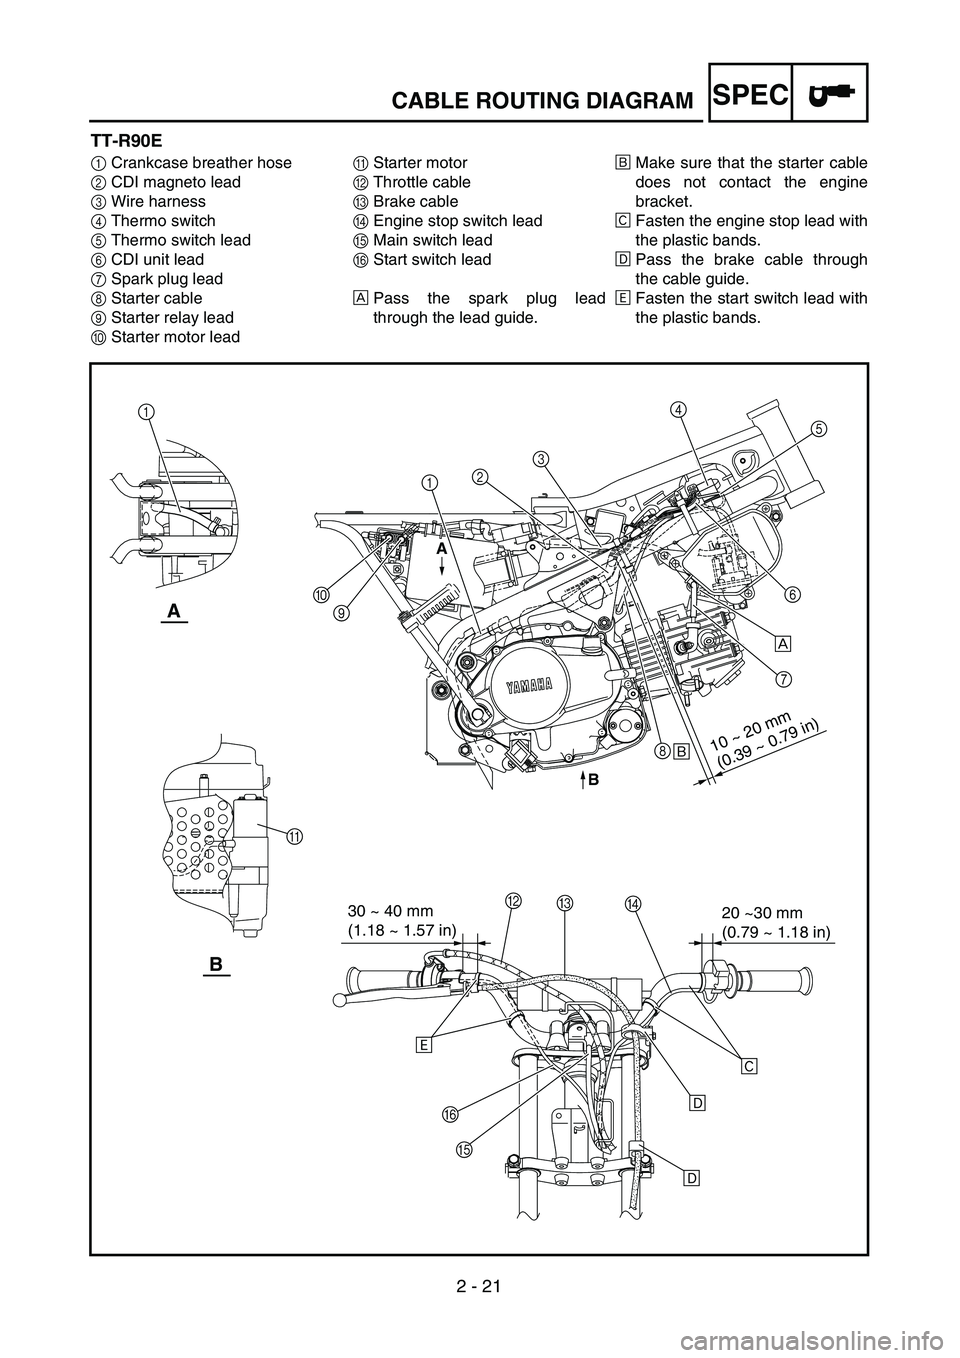 YAMAHA TTR90 2005  Betriebsanleitungen (in German) 2 - 21
SPECCABLE ROUTING DIAGRAM
TT-R90E
1Crankcase breather hose
2CDI magneto lead
3Wire harness
4Thermo switch
5Thermo switch lead
6CDI unit lead
7Spark plug lead
8Starter cable
9Starter relay lead 